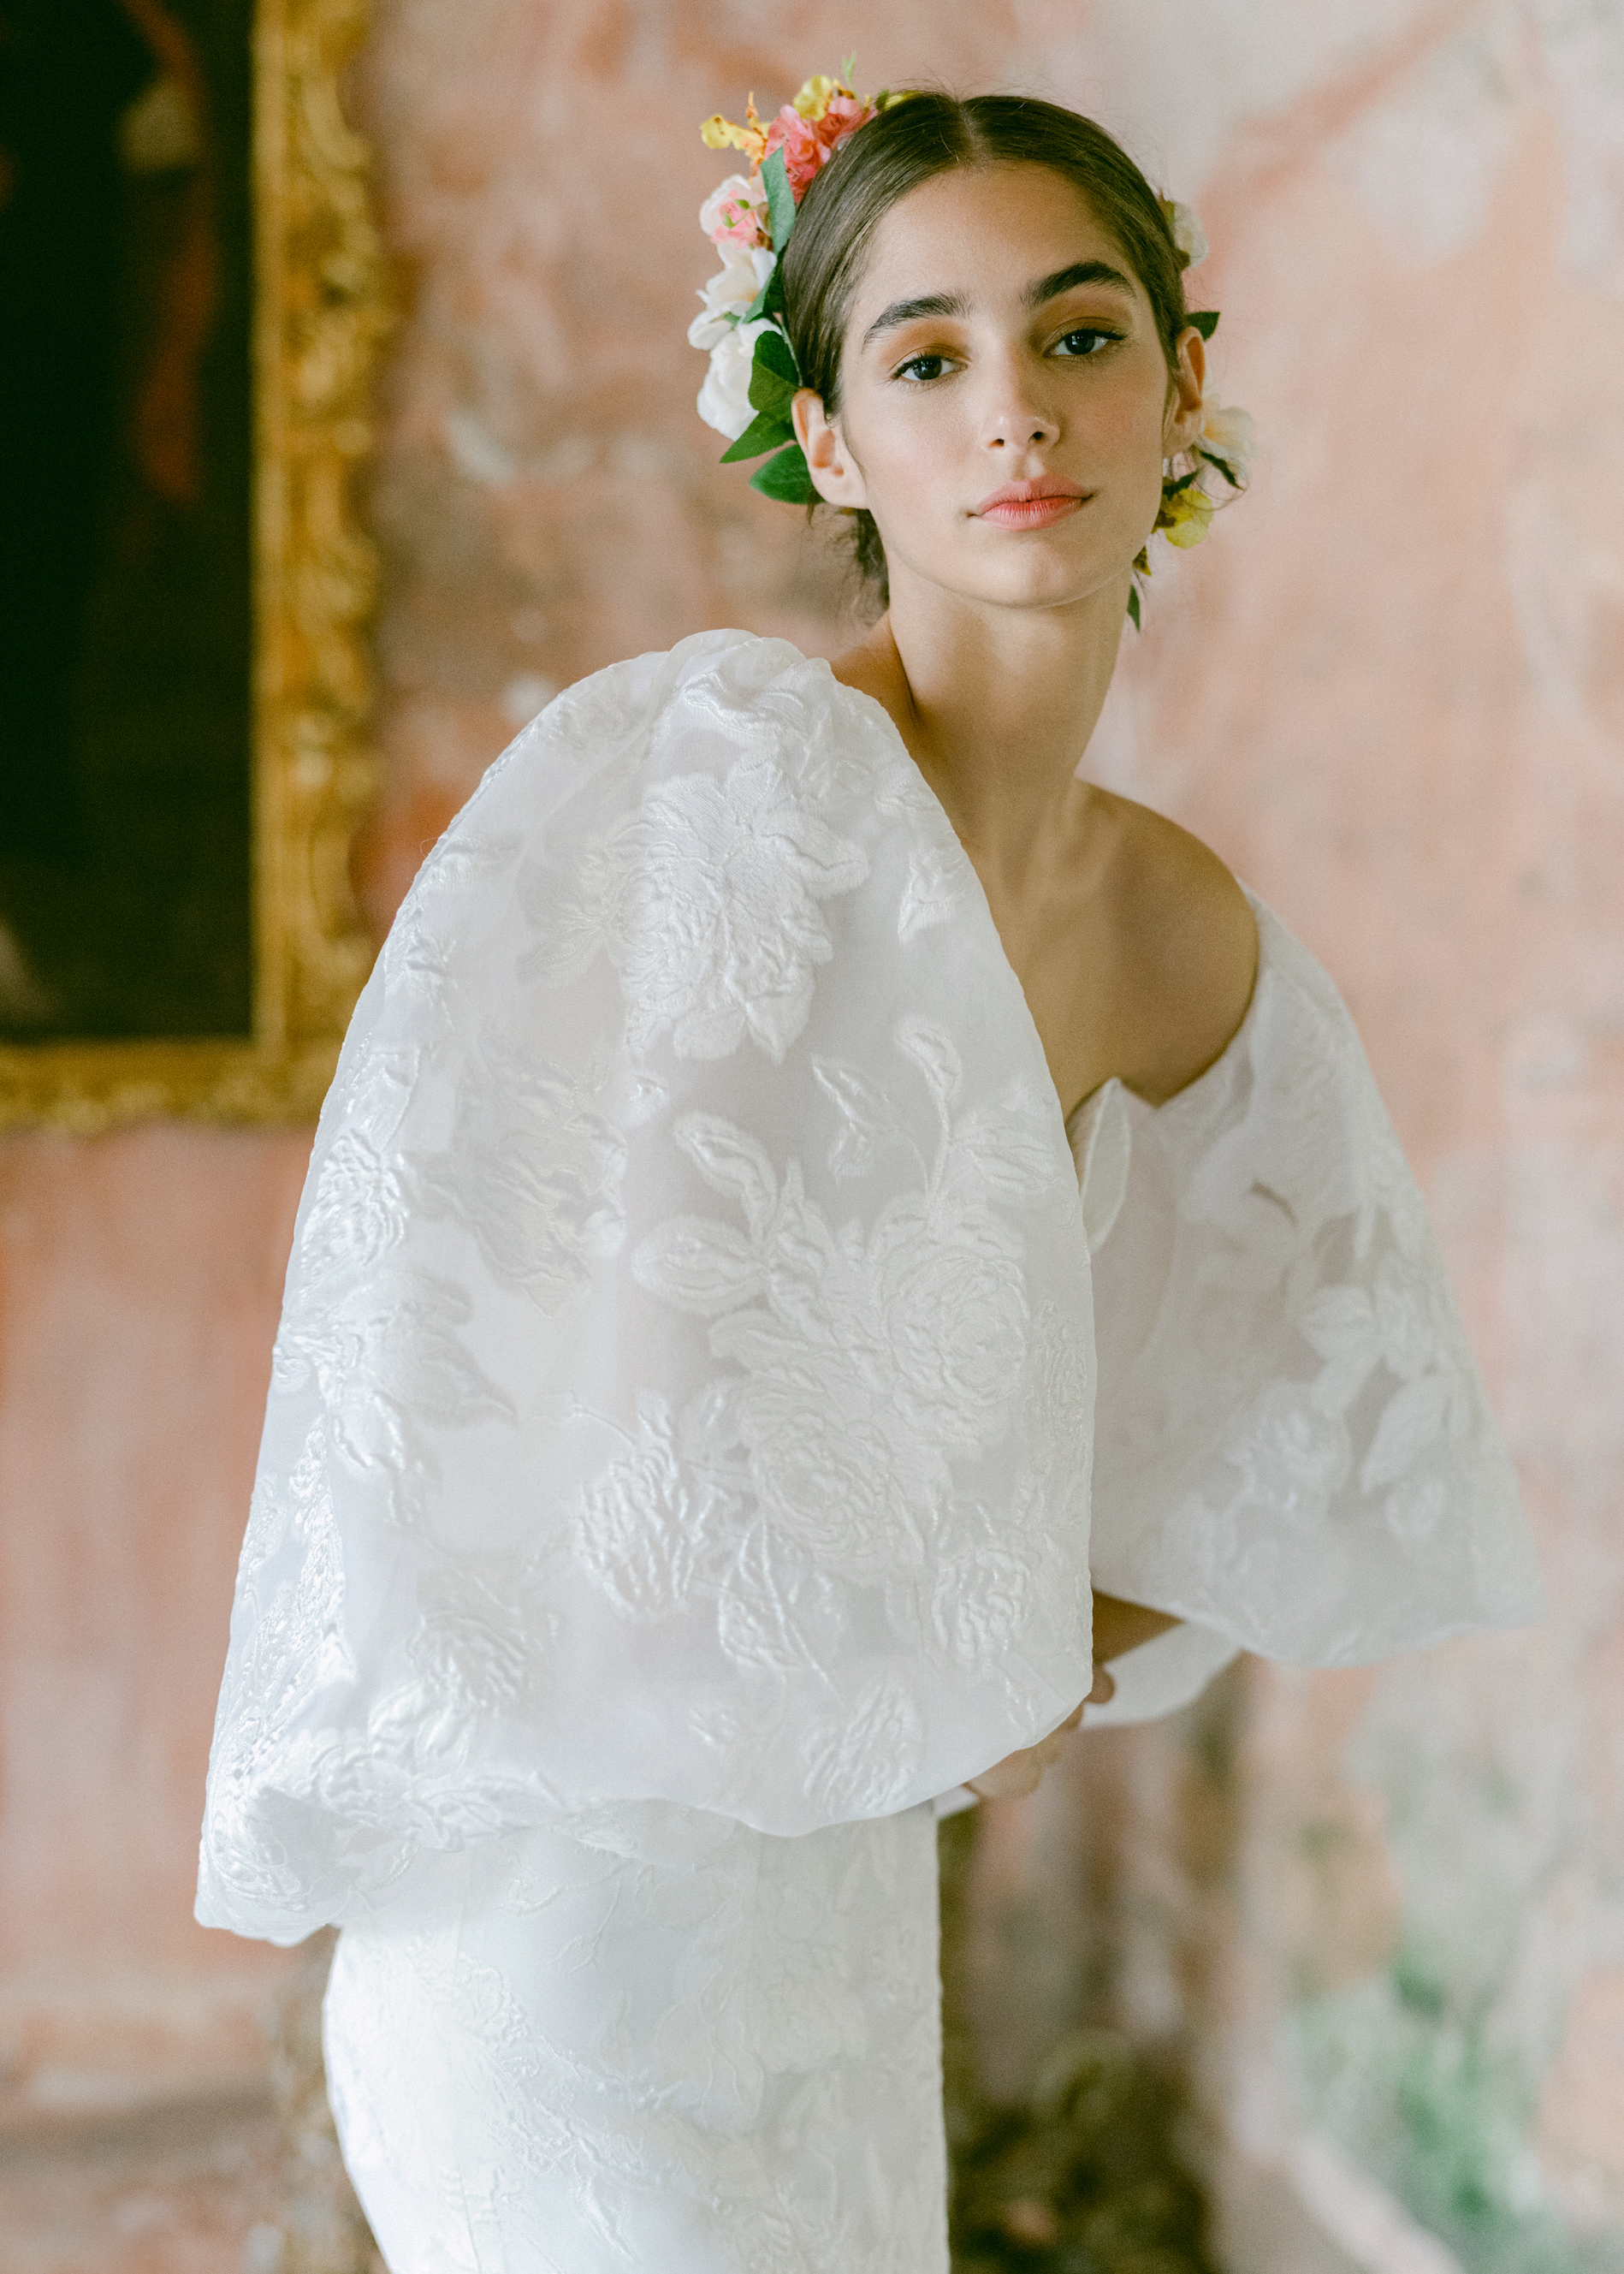 A bride wears a Monique Lhuillier dress with puff sleeves and embellished flowers.